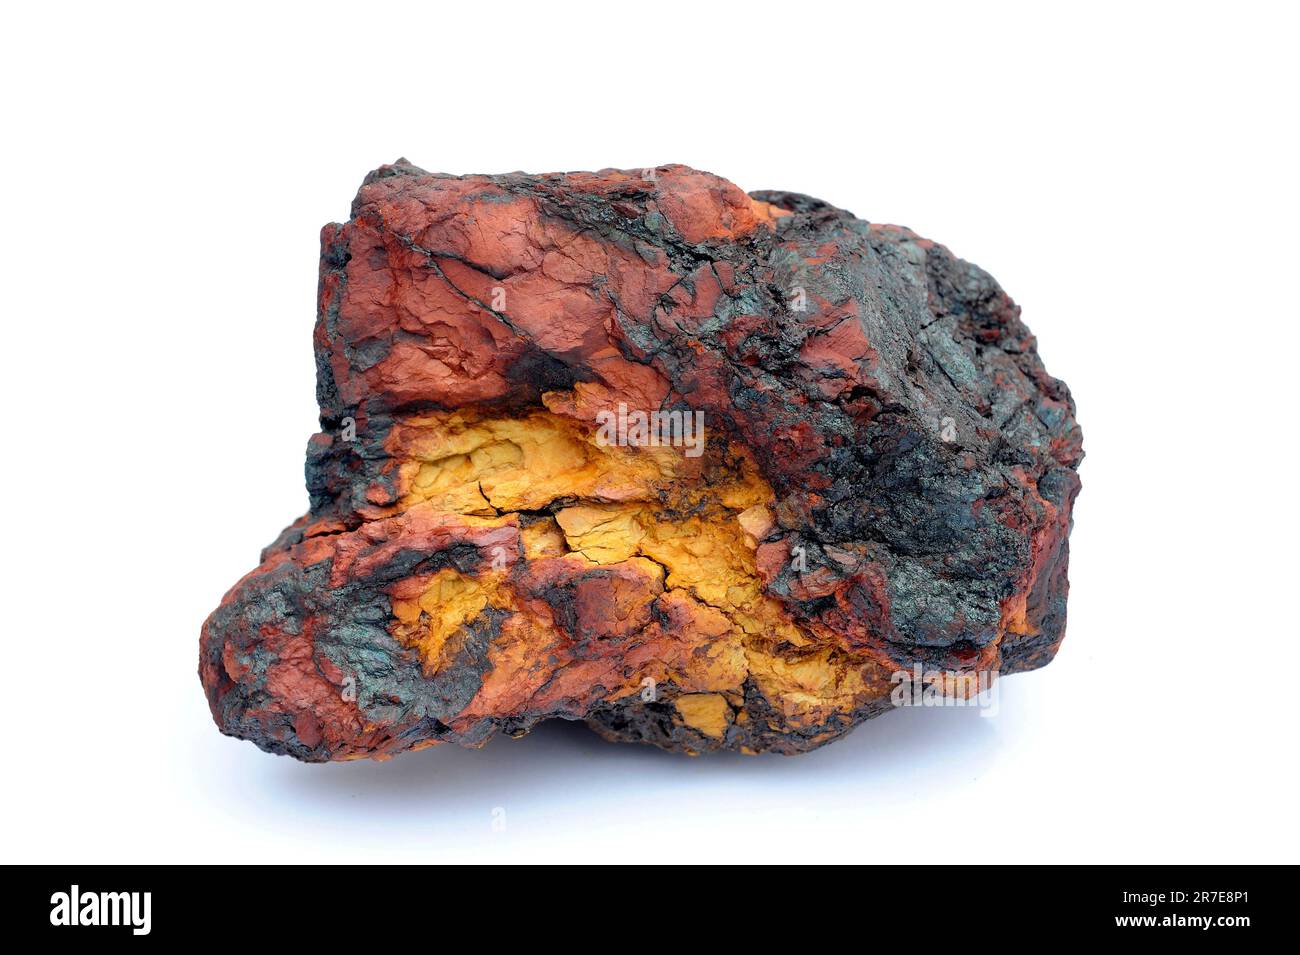 Hematite and limonite. Hematite or haematite is a mineral composed by iron oxide; limonite are formed by iron hidroxide. Both are iron ore. The sample Stock Photo